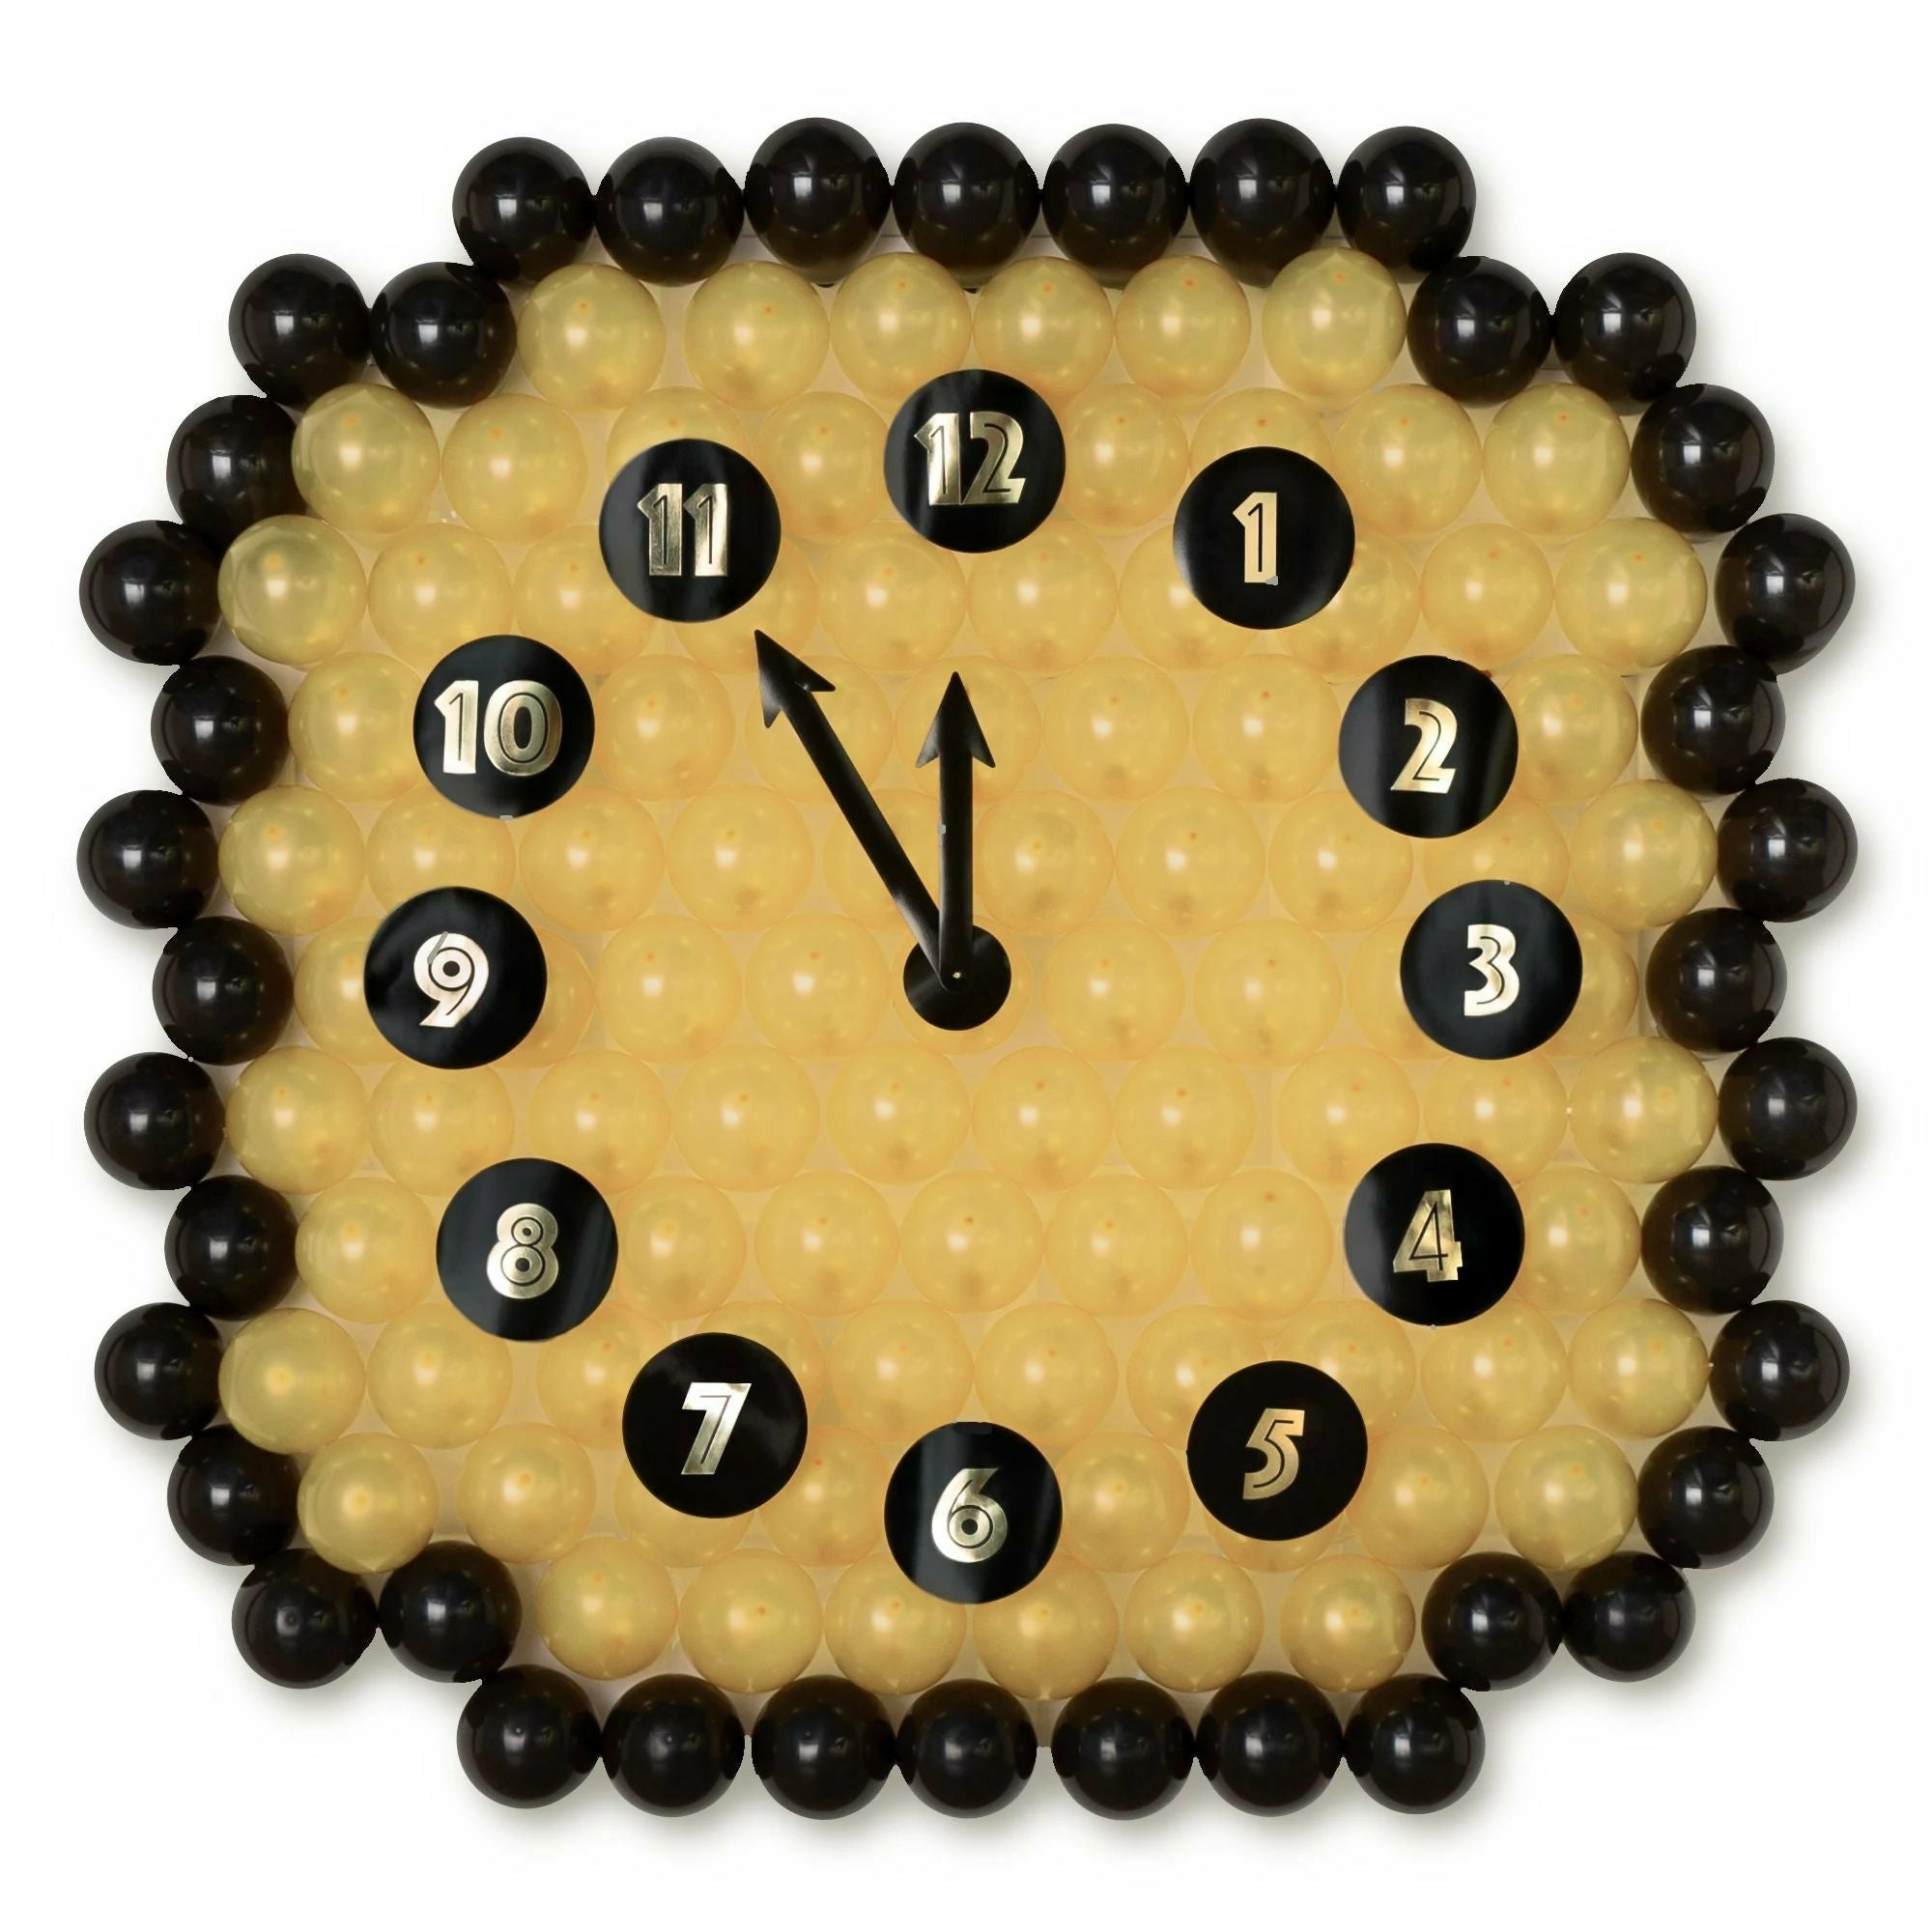 Amscan HOLIDAY: NEW YEAR'S New Year's Eve Countdown Clock Sculpted Balloon Back Drop Kit